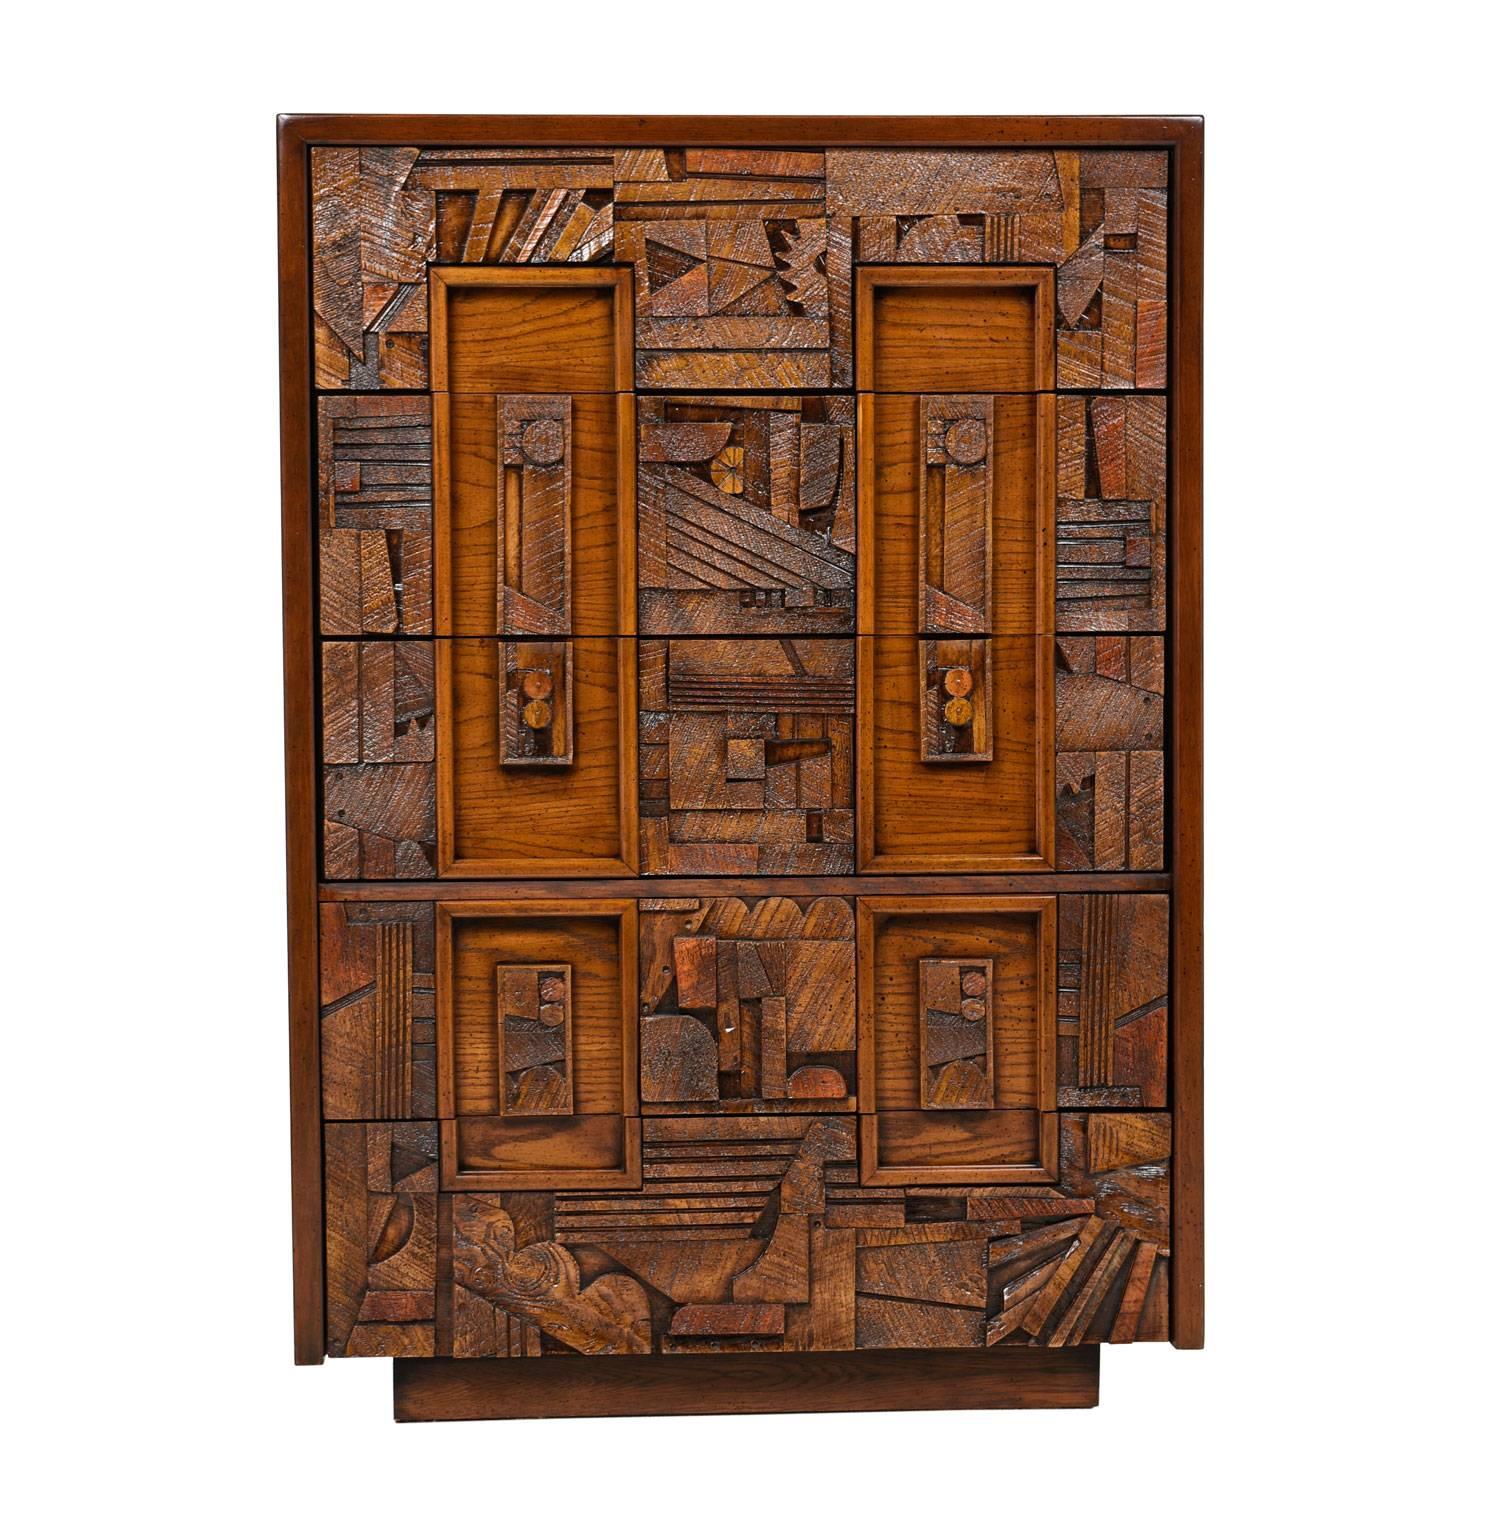 A midcentury, Brutalist dresser inspired by the work of American designer Paul Evans that was produced by Lane. Intricately laid and highly textured patterns adorn the front facade. The roughhewn forms exemplify the Brutalist aesthetic. The bold,